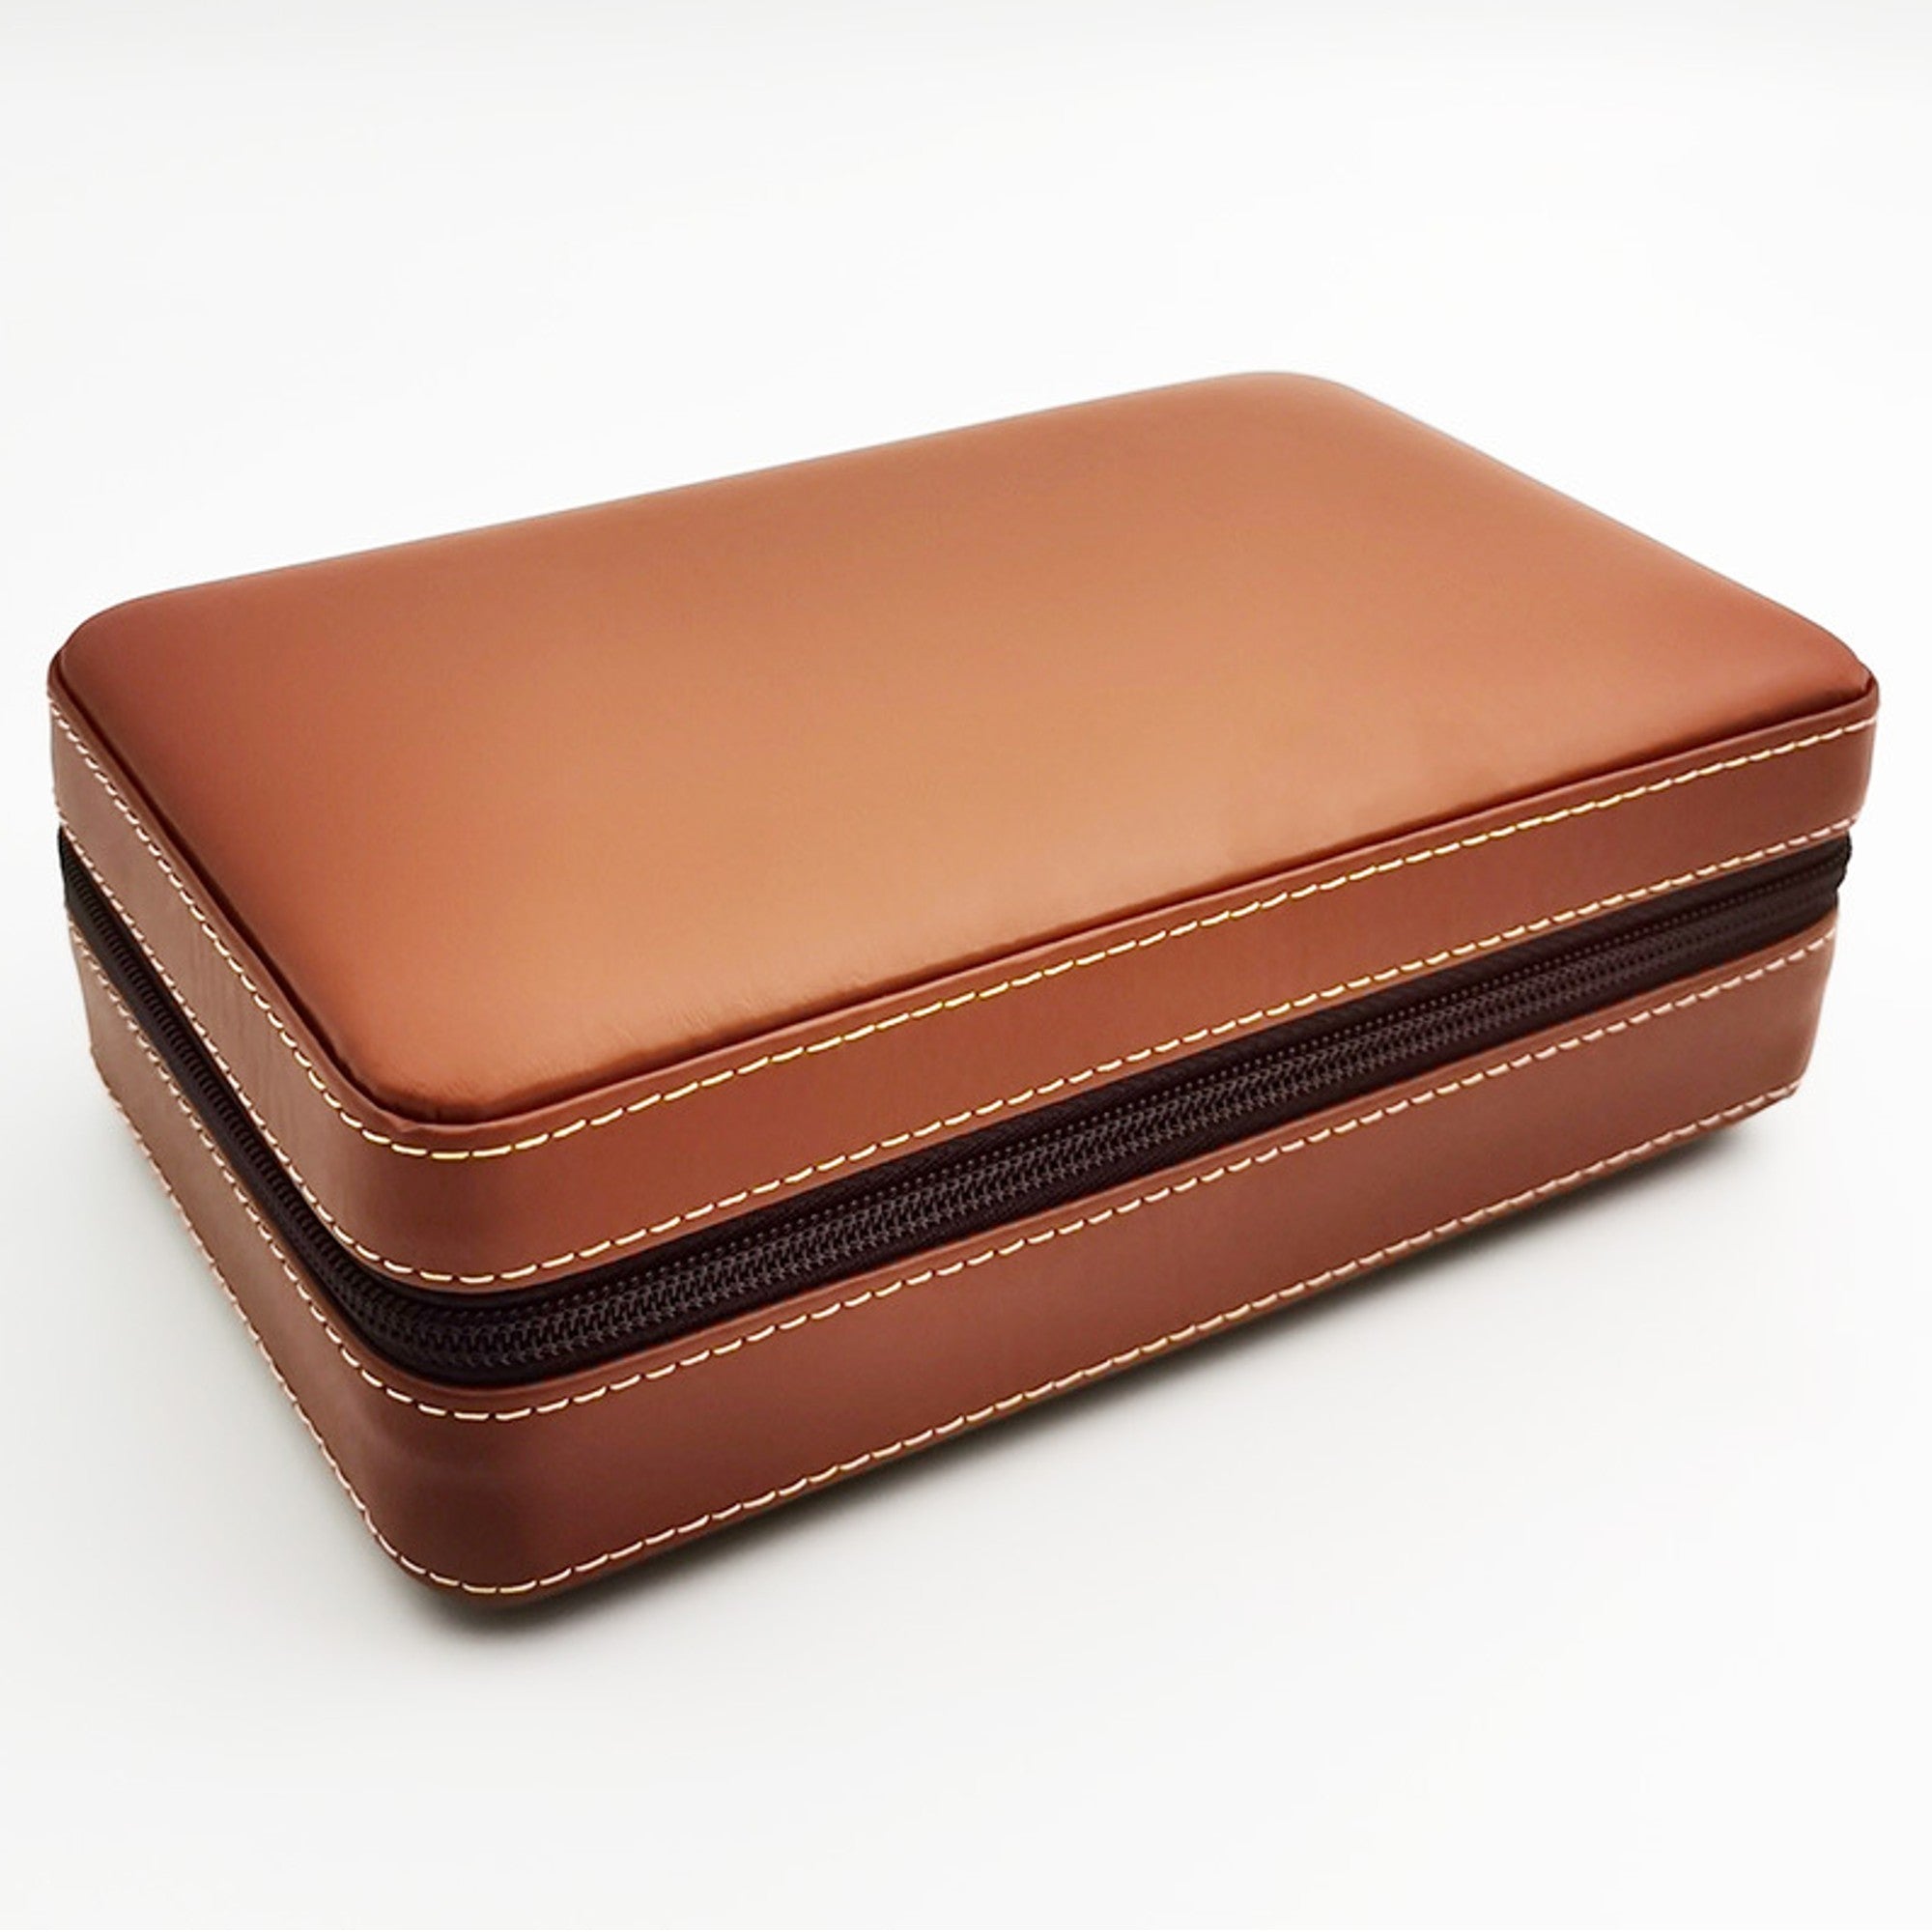 Portable Travel Cigar Humidor Leather Case – Ashtray Planet